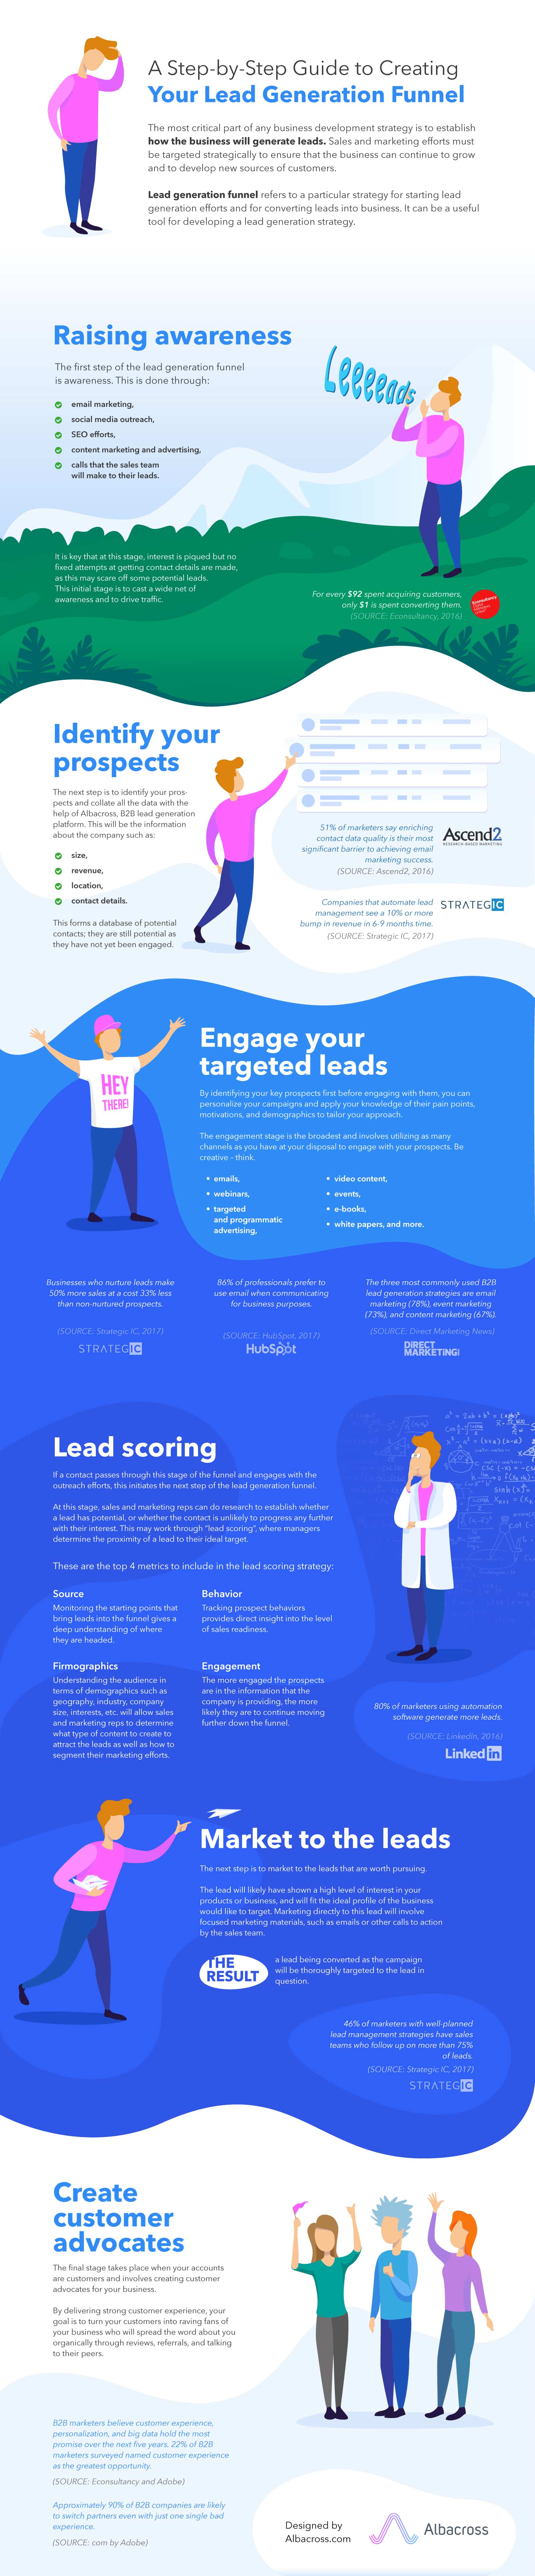 A Step-by-Step Guide to Creating Your Lead Generation Funnel [Infographic]